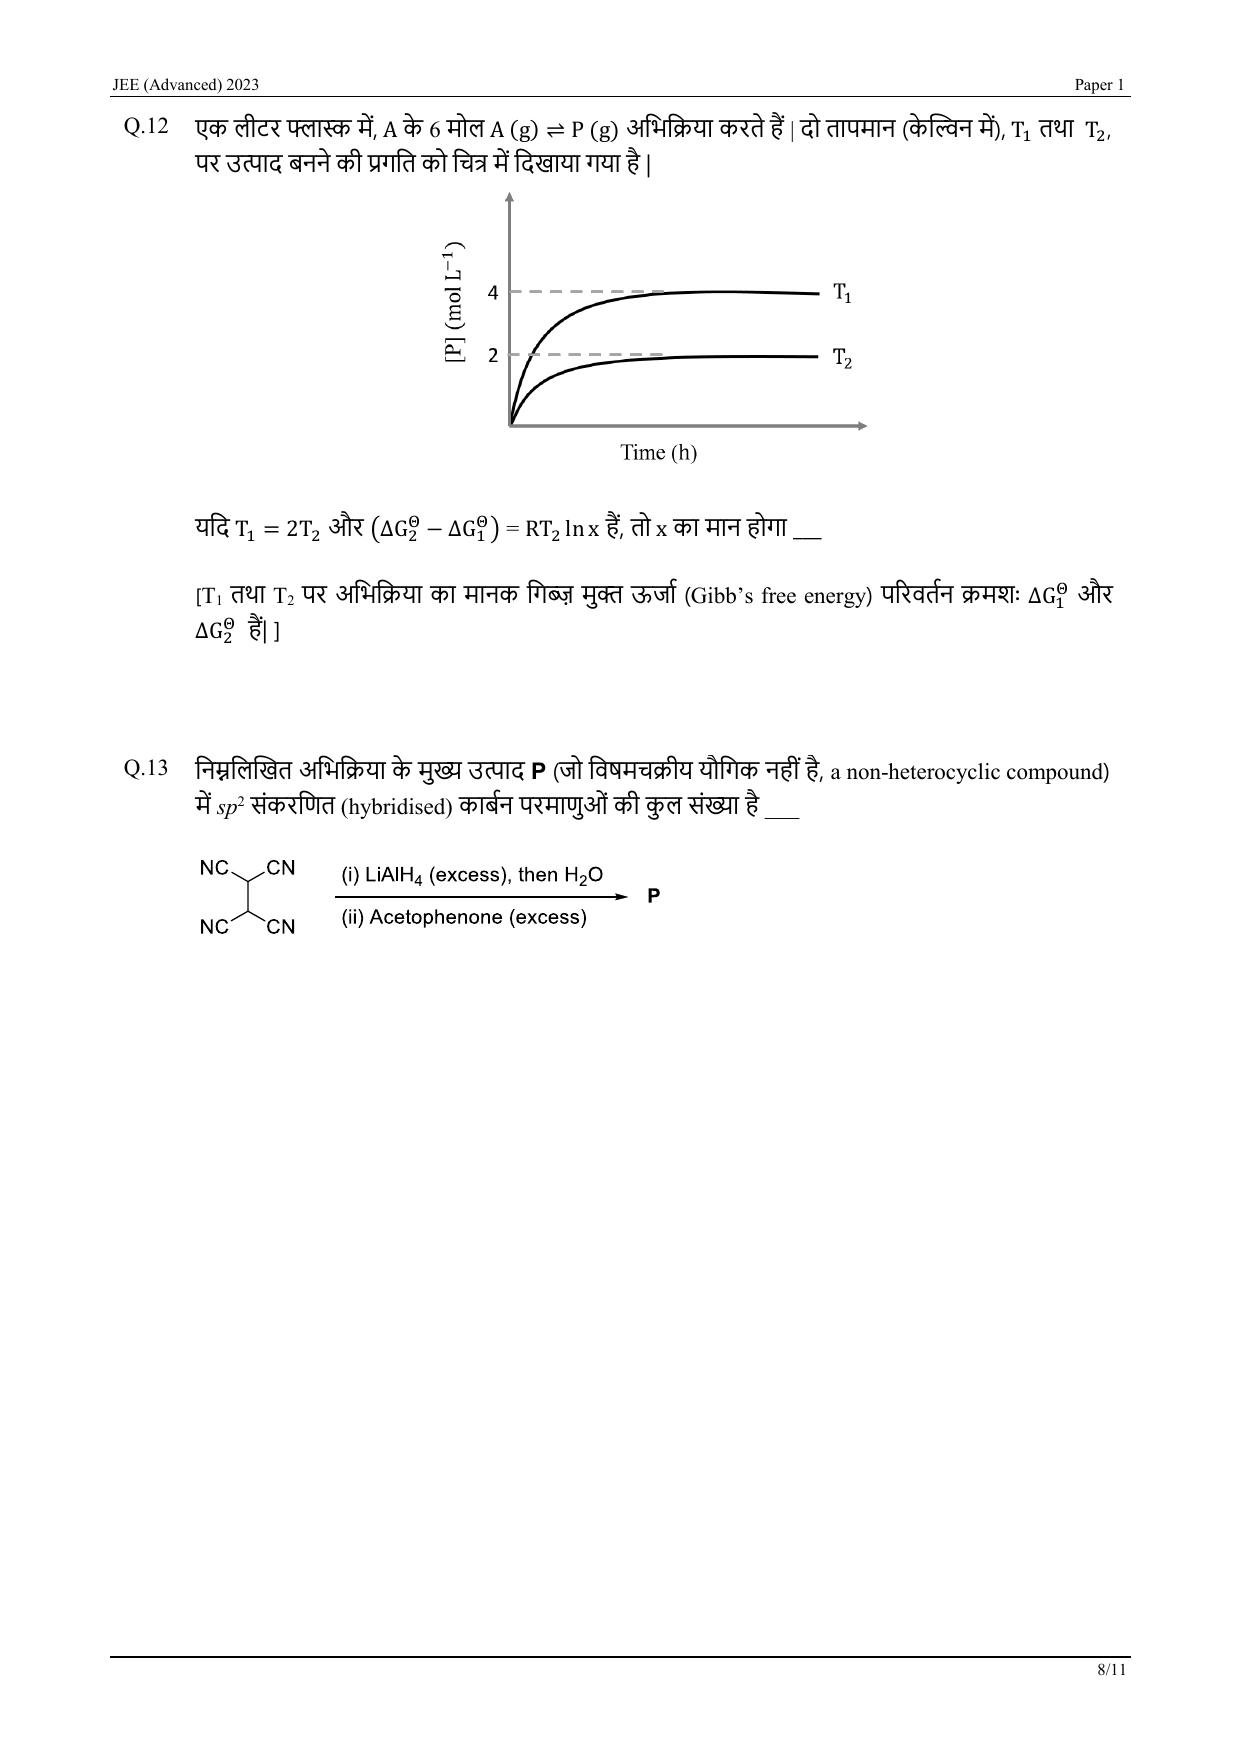 JEE Advanced 2023 Question Paper 1 (Hindi) - Page 28